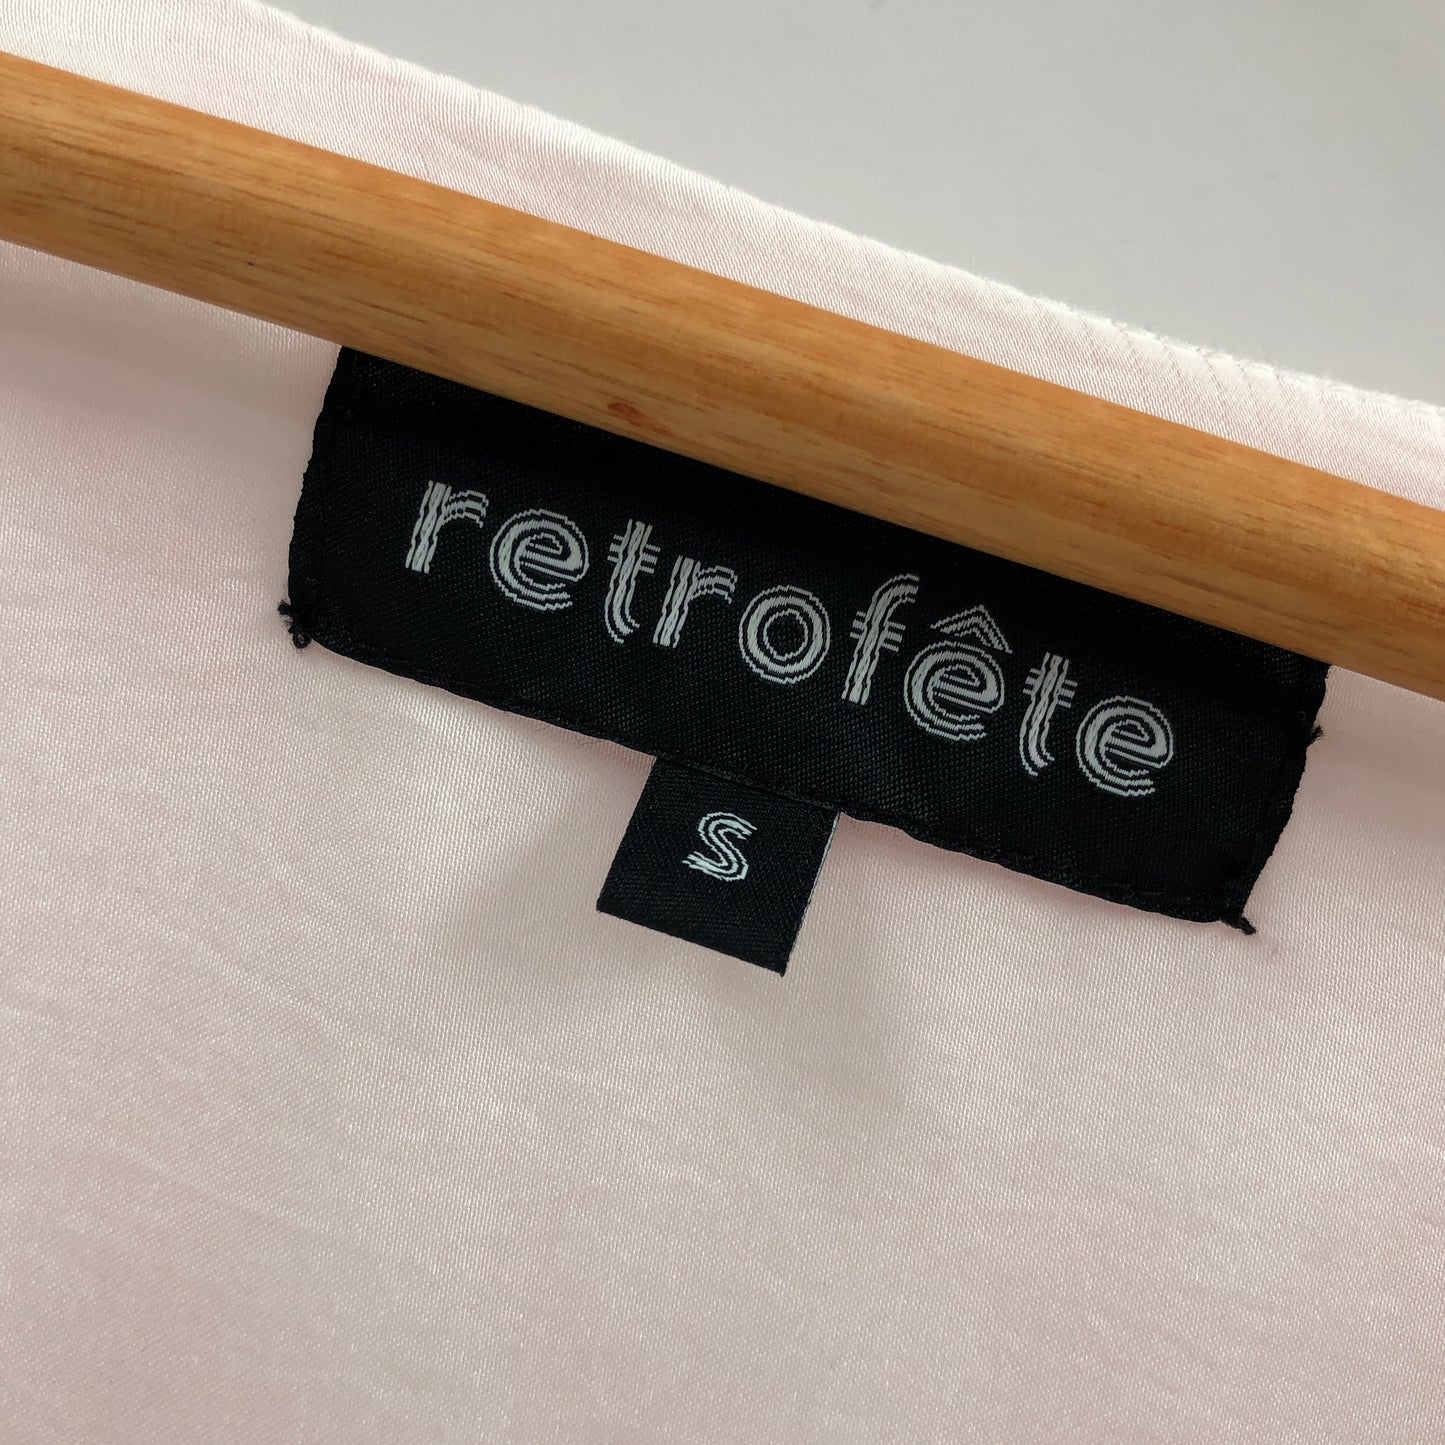 Retrofete Gabrielle Robe Dress in Marble Pink Small